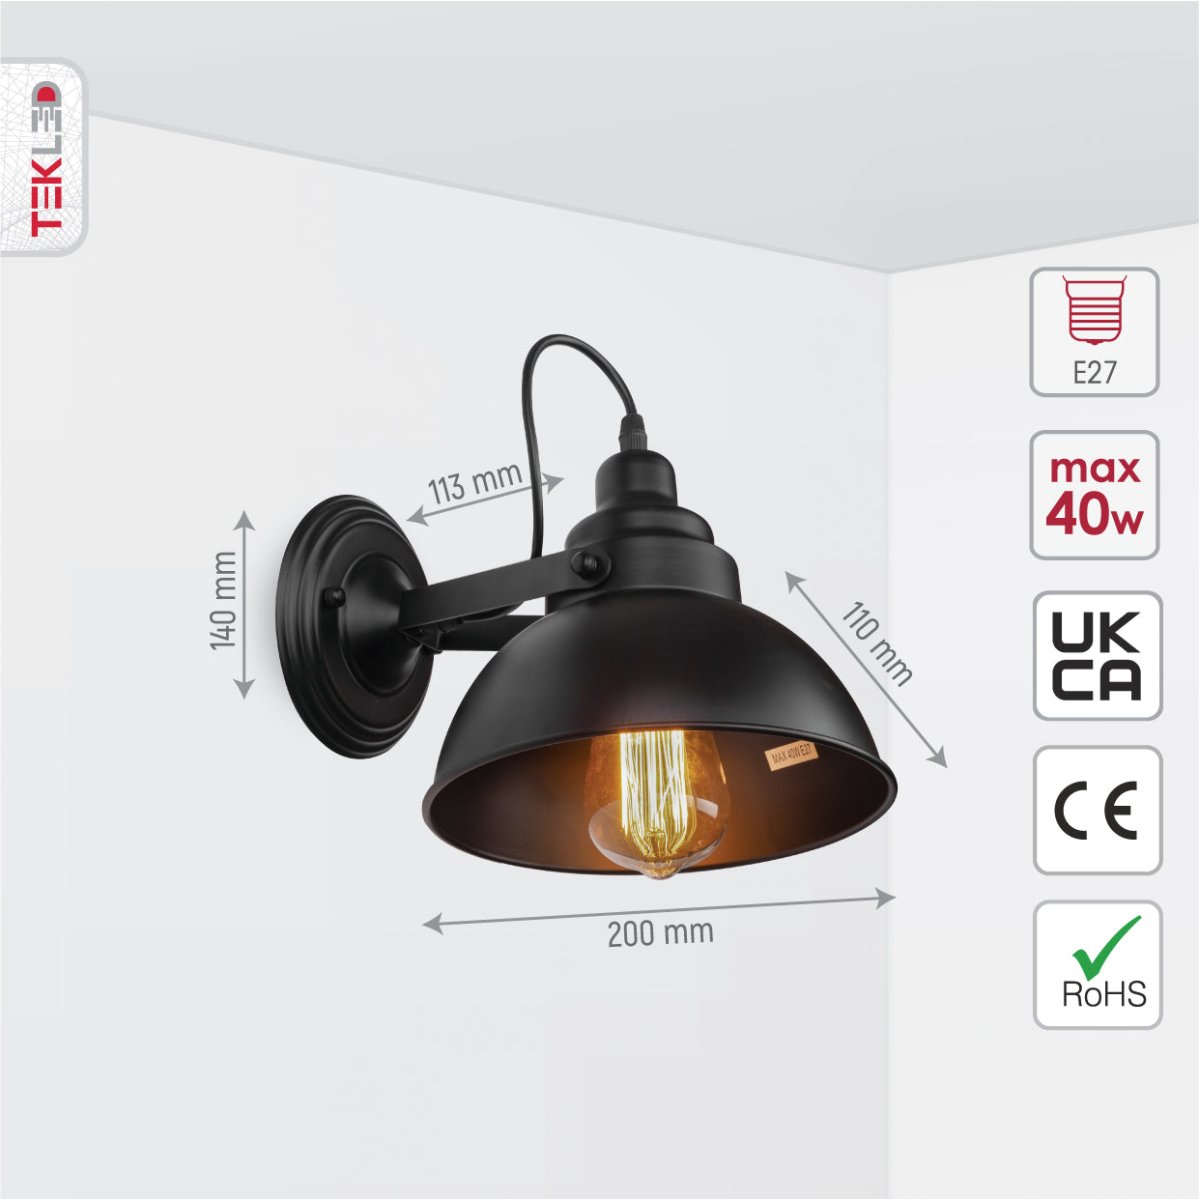 Technical specs and measurements for Black Metal Hinged Dome Wall Light with E27 Fitting